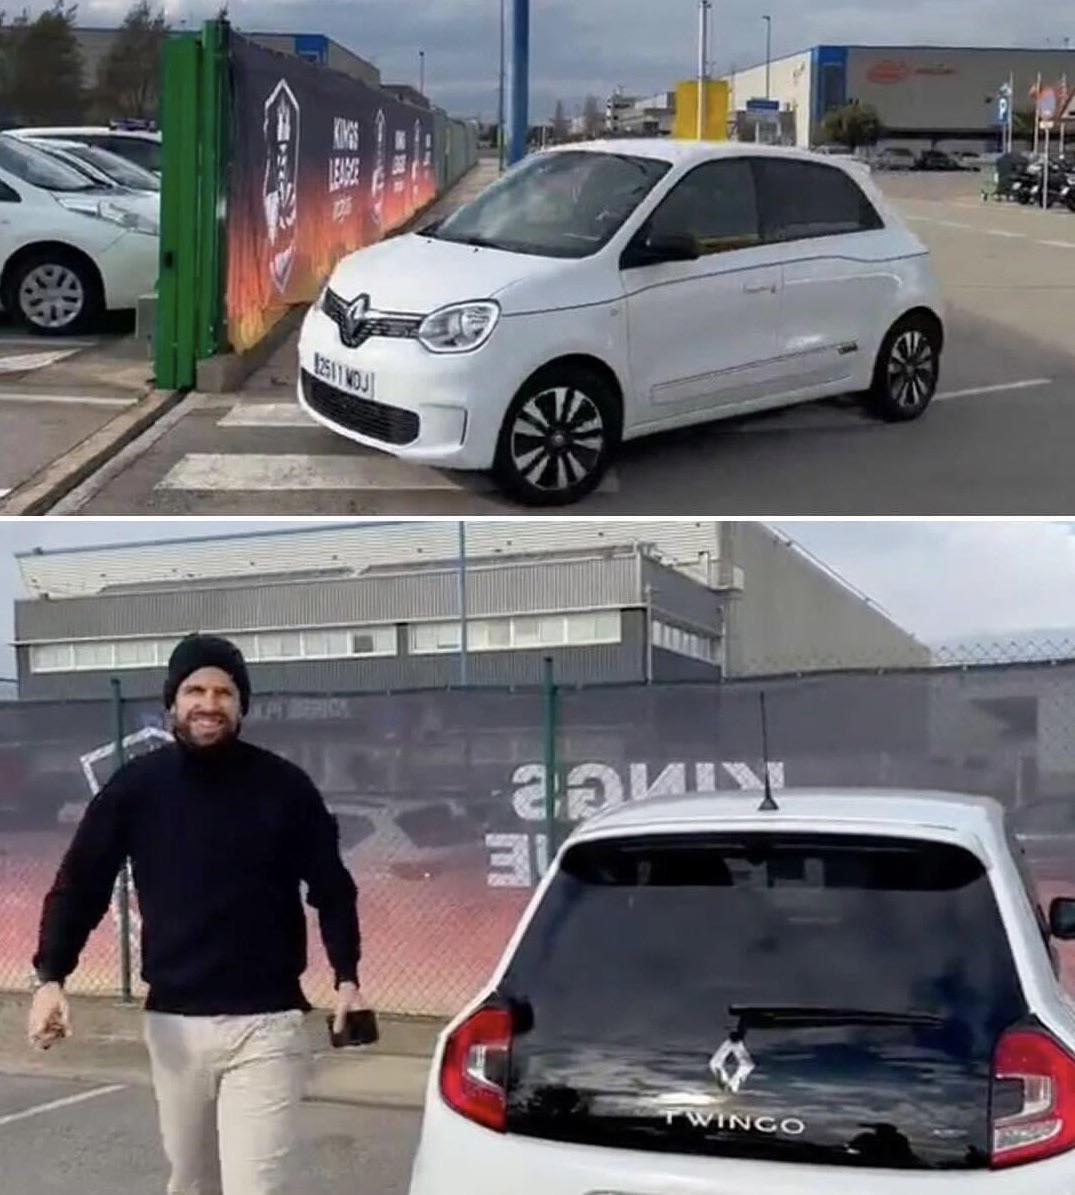 Days after ex- partner Shakira said, “You traded a Ferrari for a Twingo, you traded a Rolex for a Casio,” Gerard Piqué arrived at work driving a Twingo and wearing a Casio watch